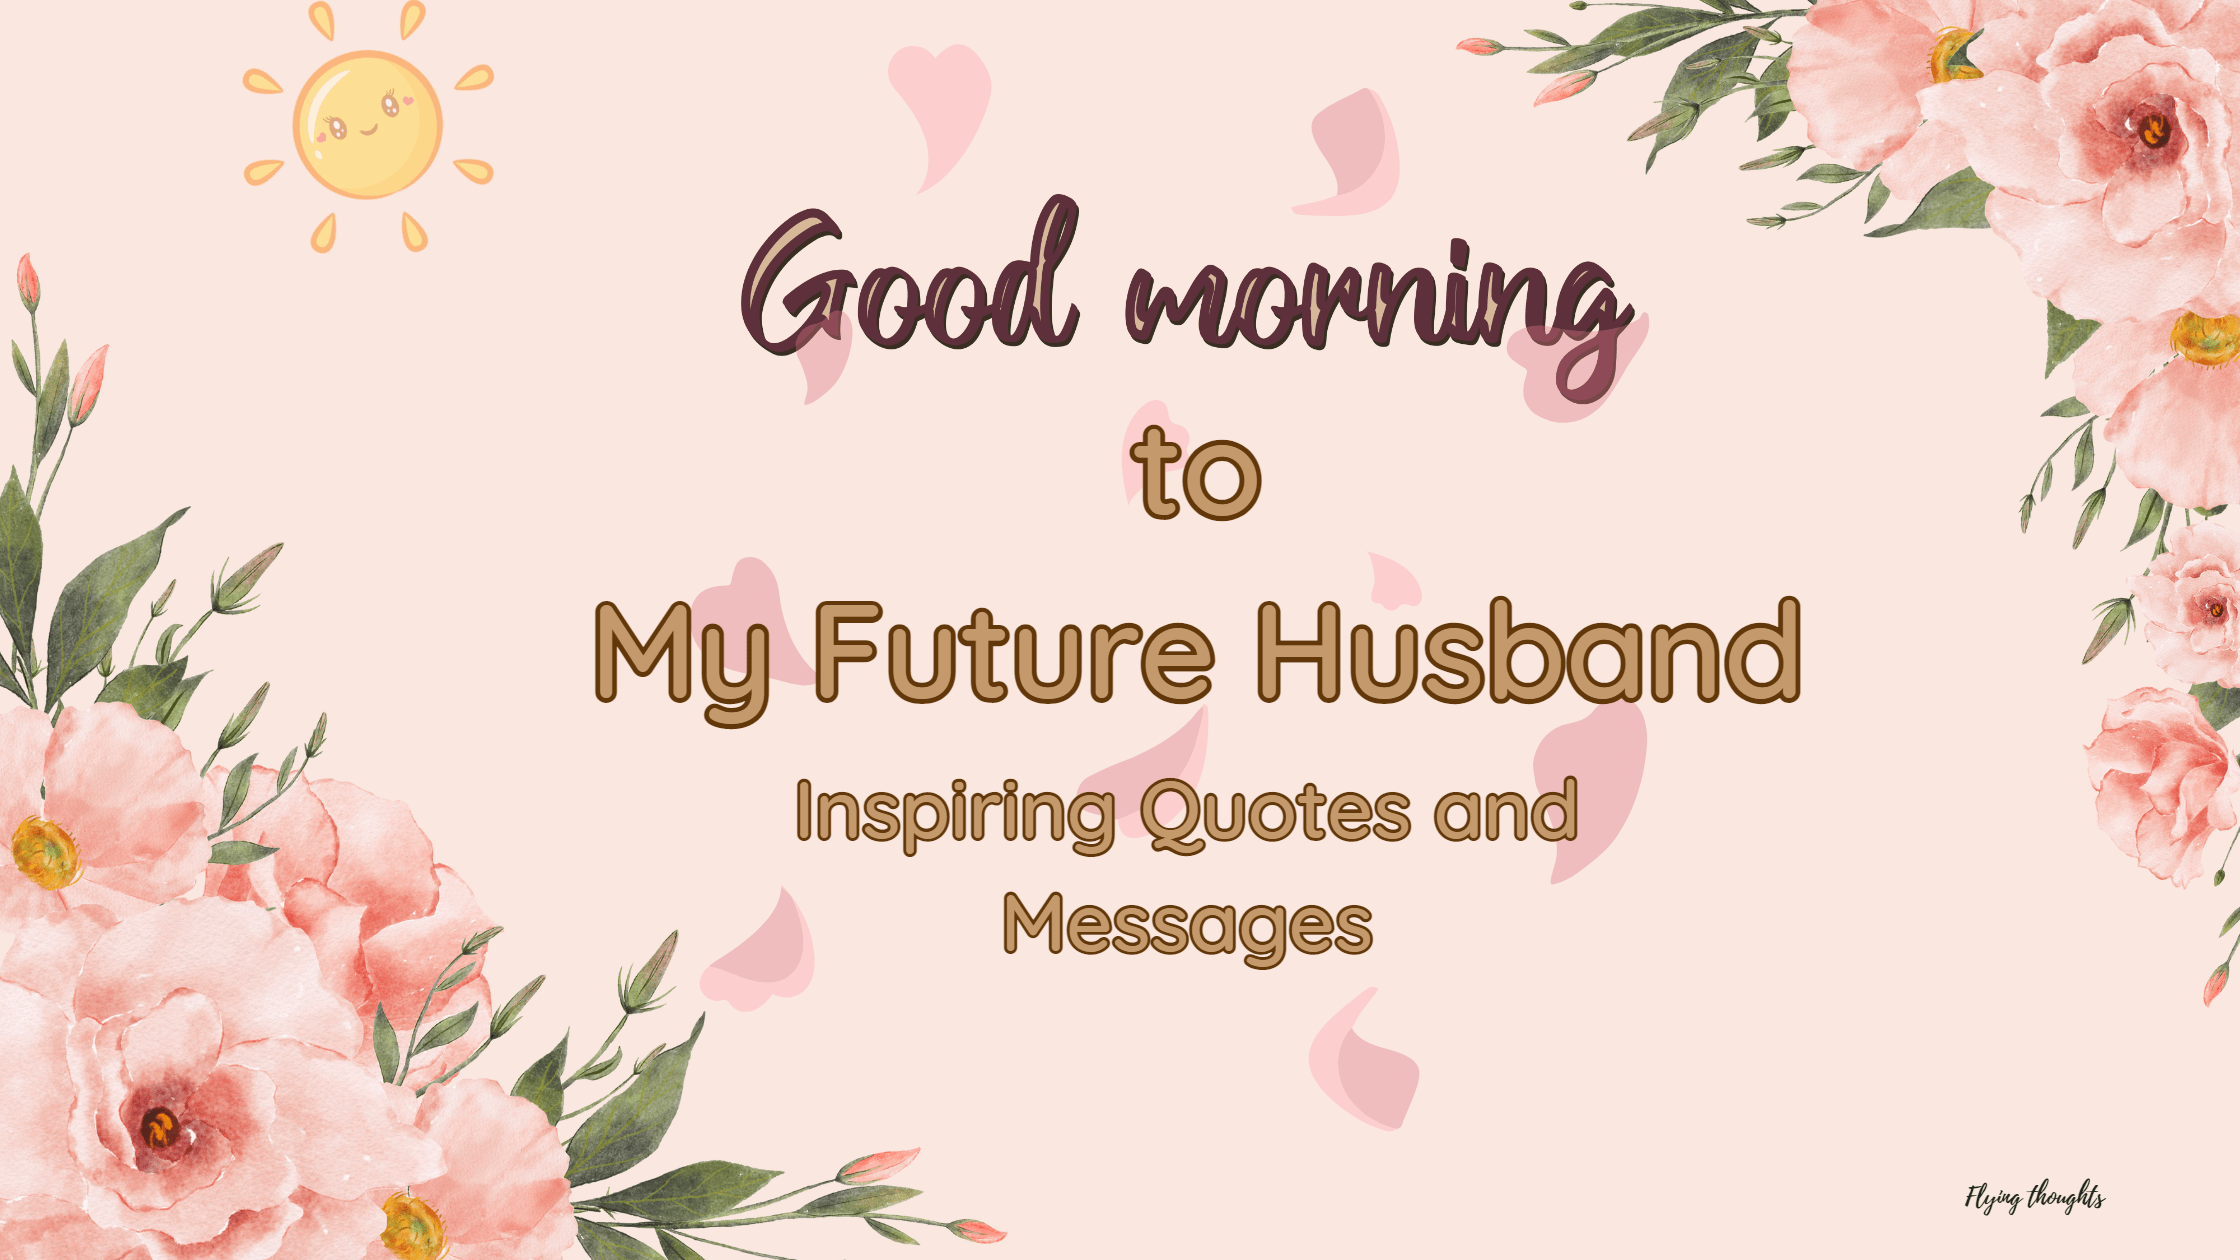 Good Morning to My Future Husband: Inspiring Quotes and Messages